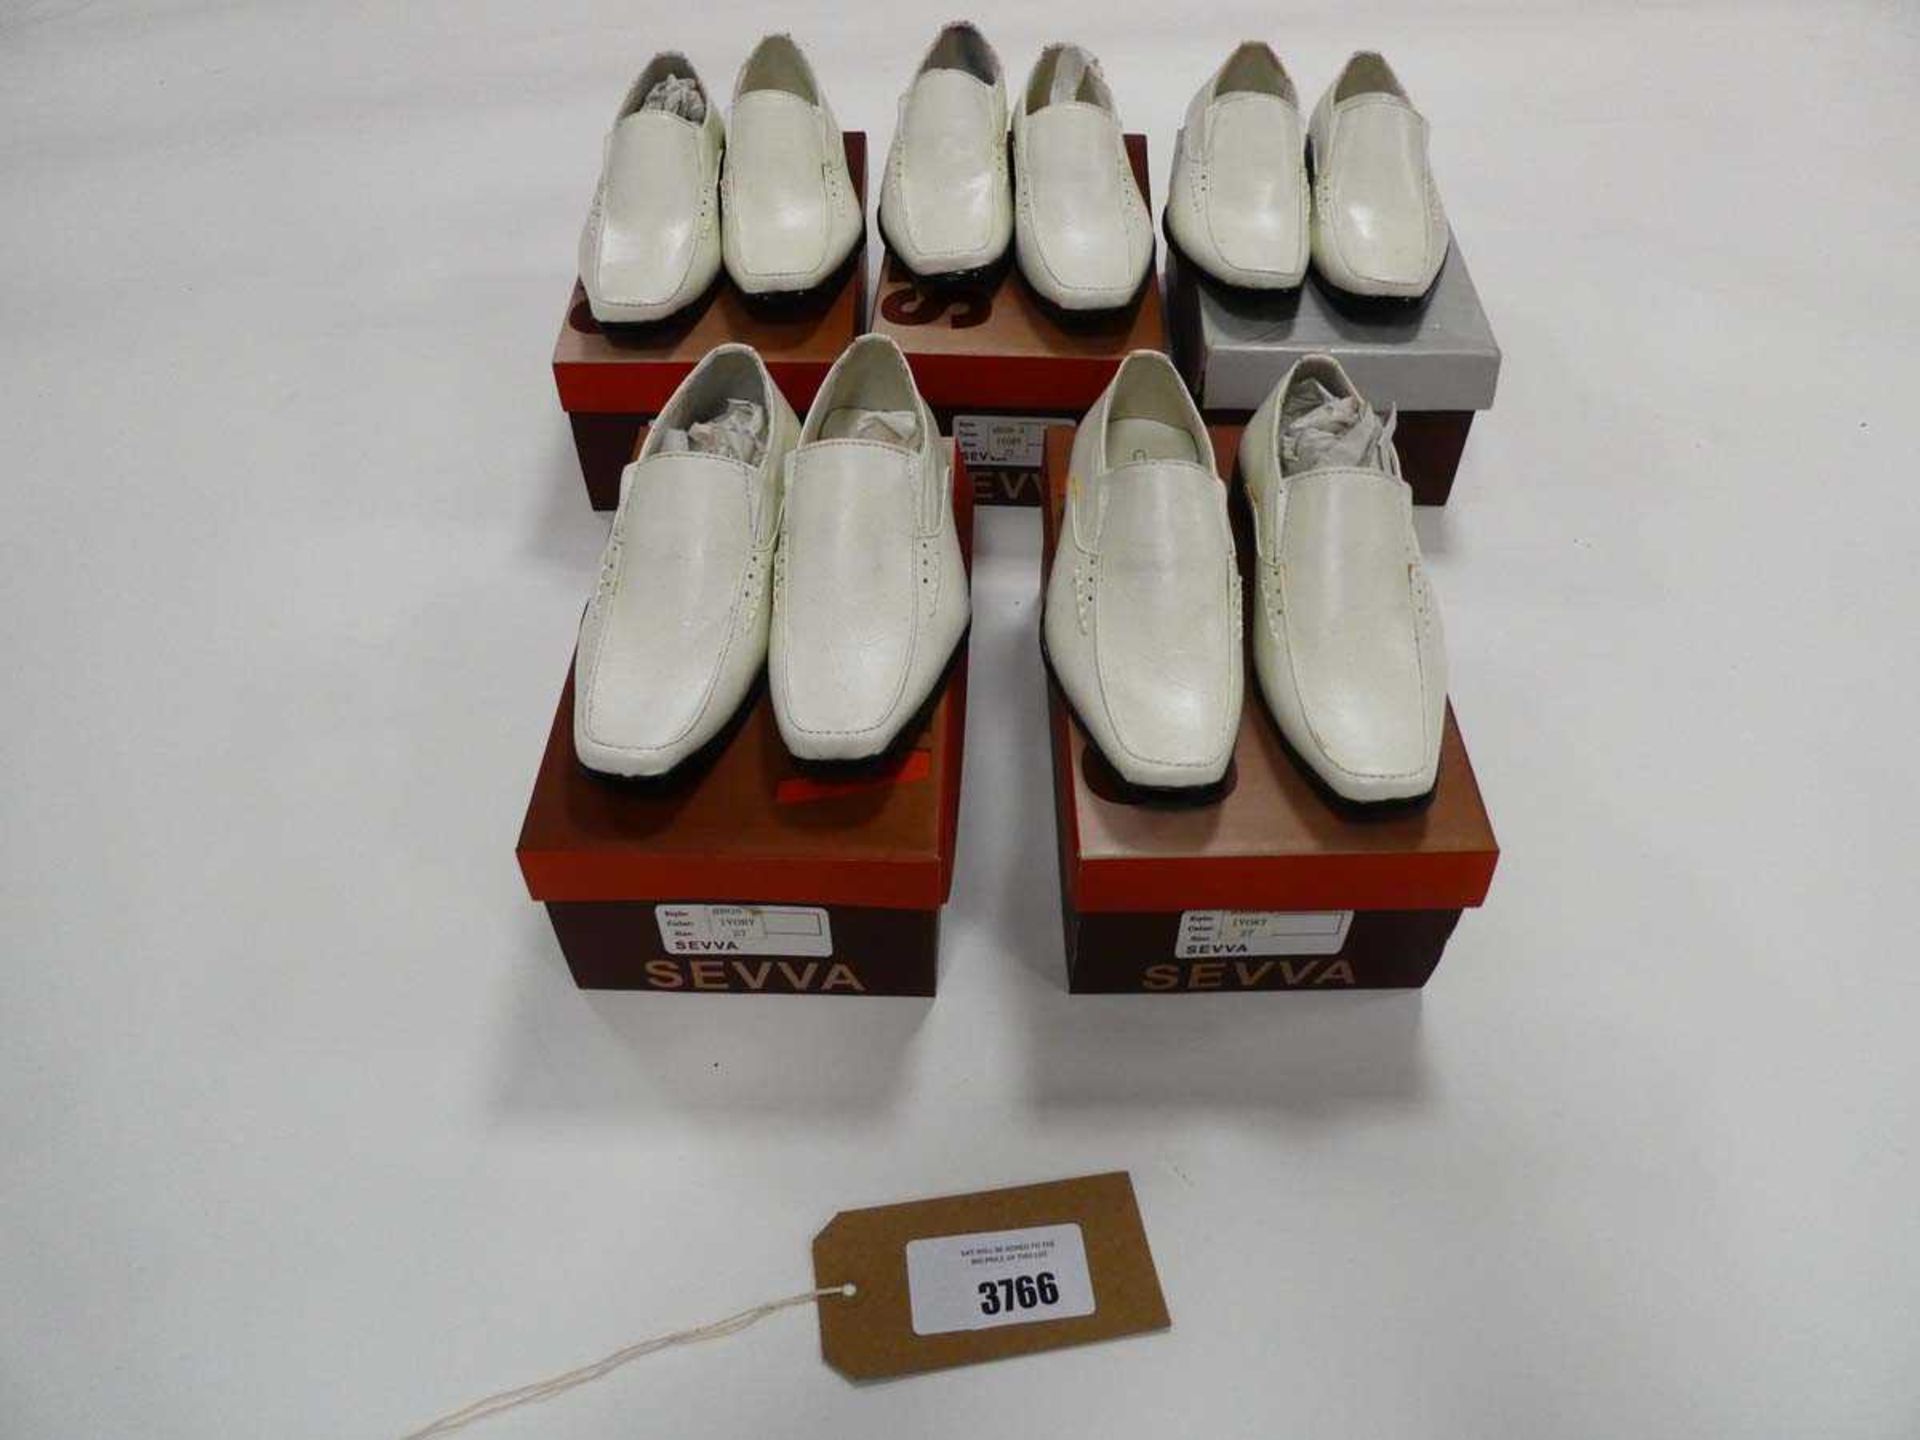 Five pairs of Sevva white children's loafers, all size 27, with boxes and dustbags (bagged)